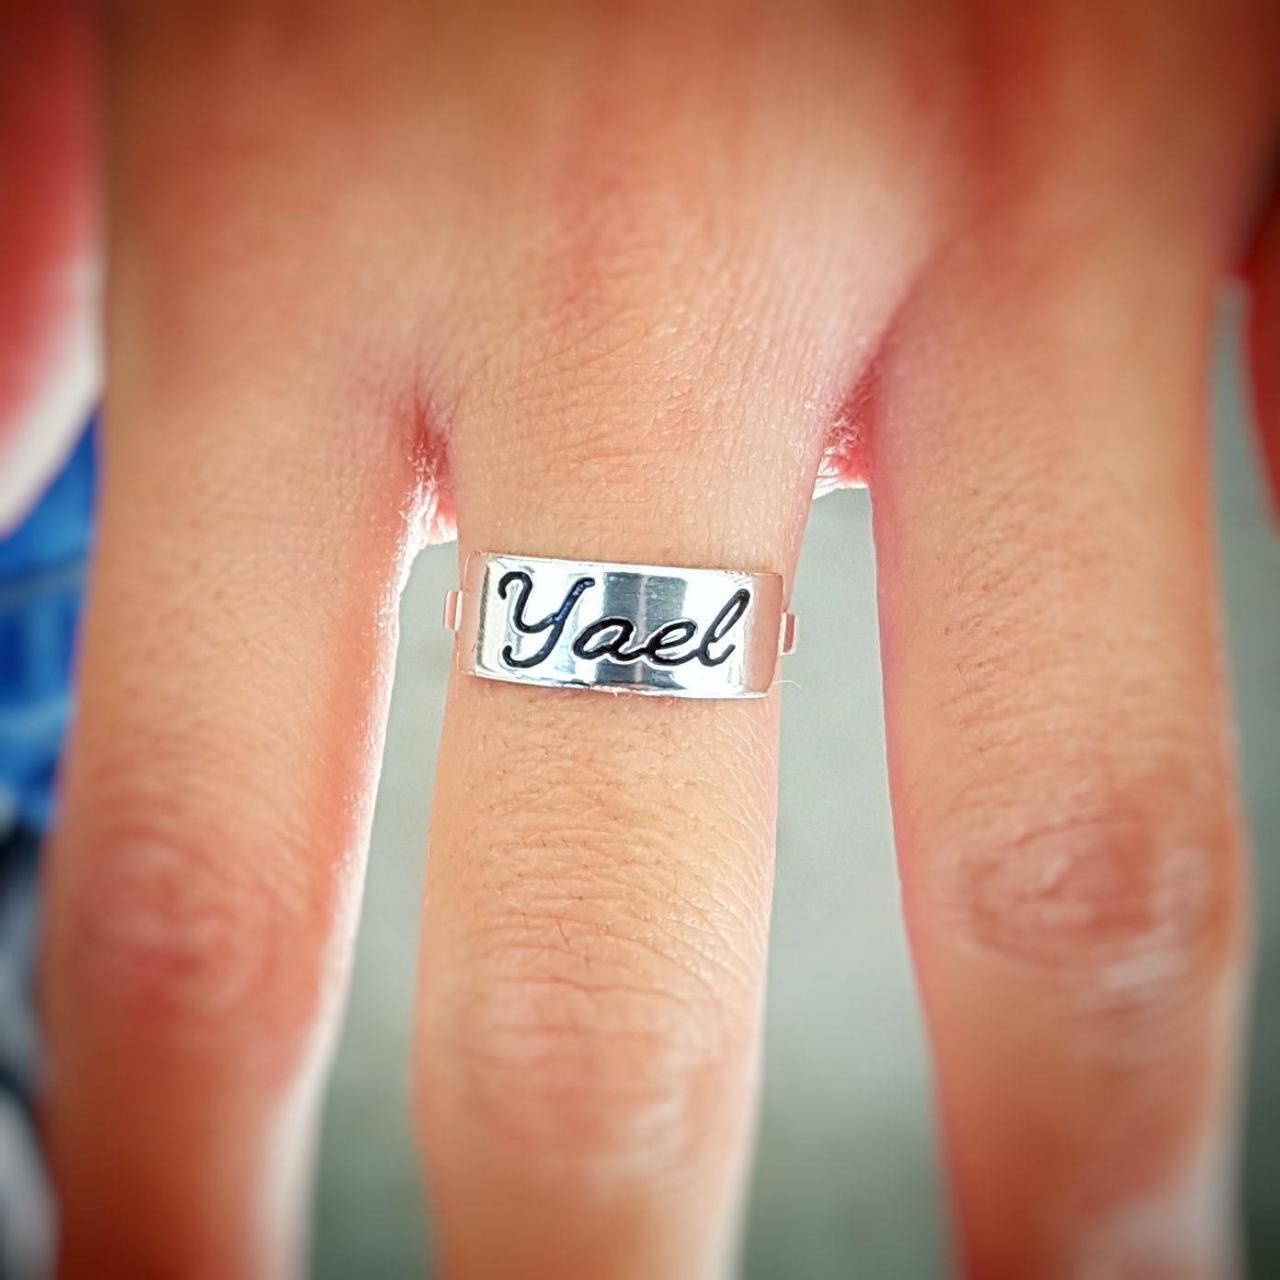 Personalized Ring - Custom Ring - Engraved Ring - Personalized Jewelry - Personalized Gift - Personalized Name Ring - Sterling Silver Name Ring -